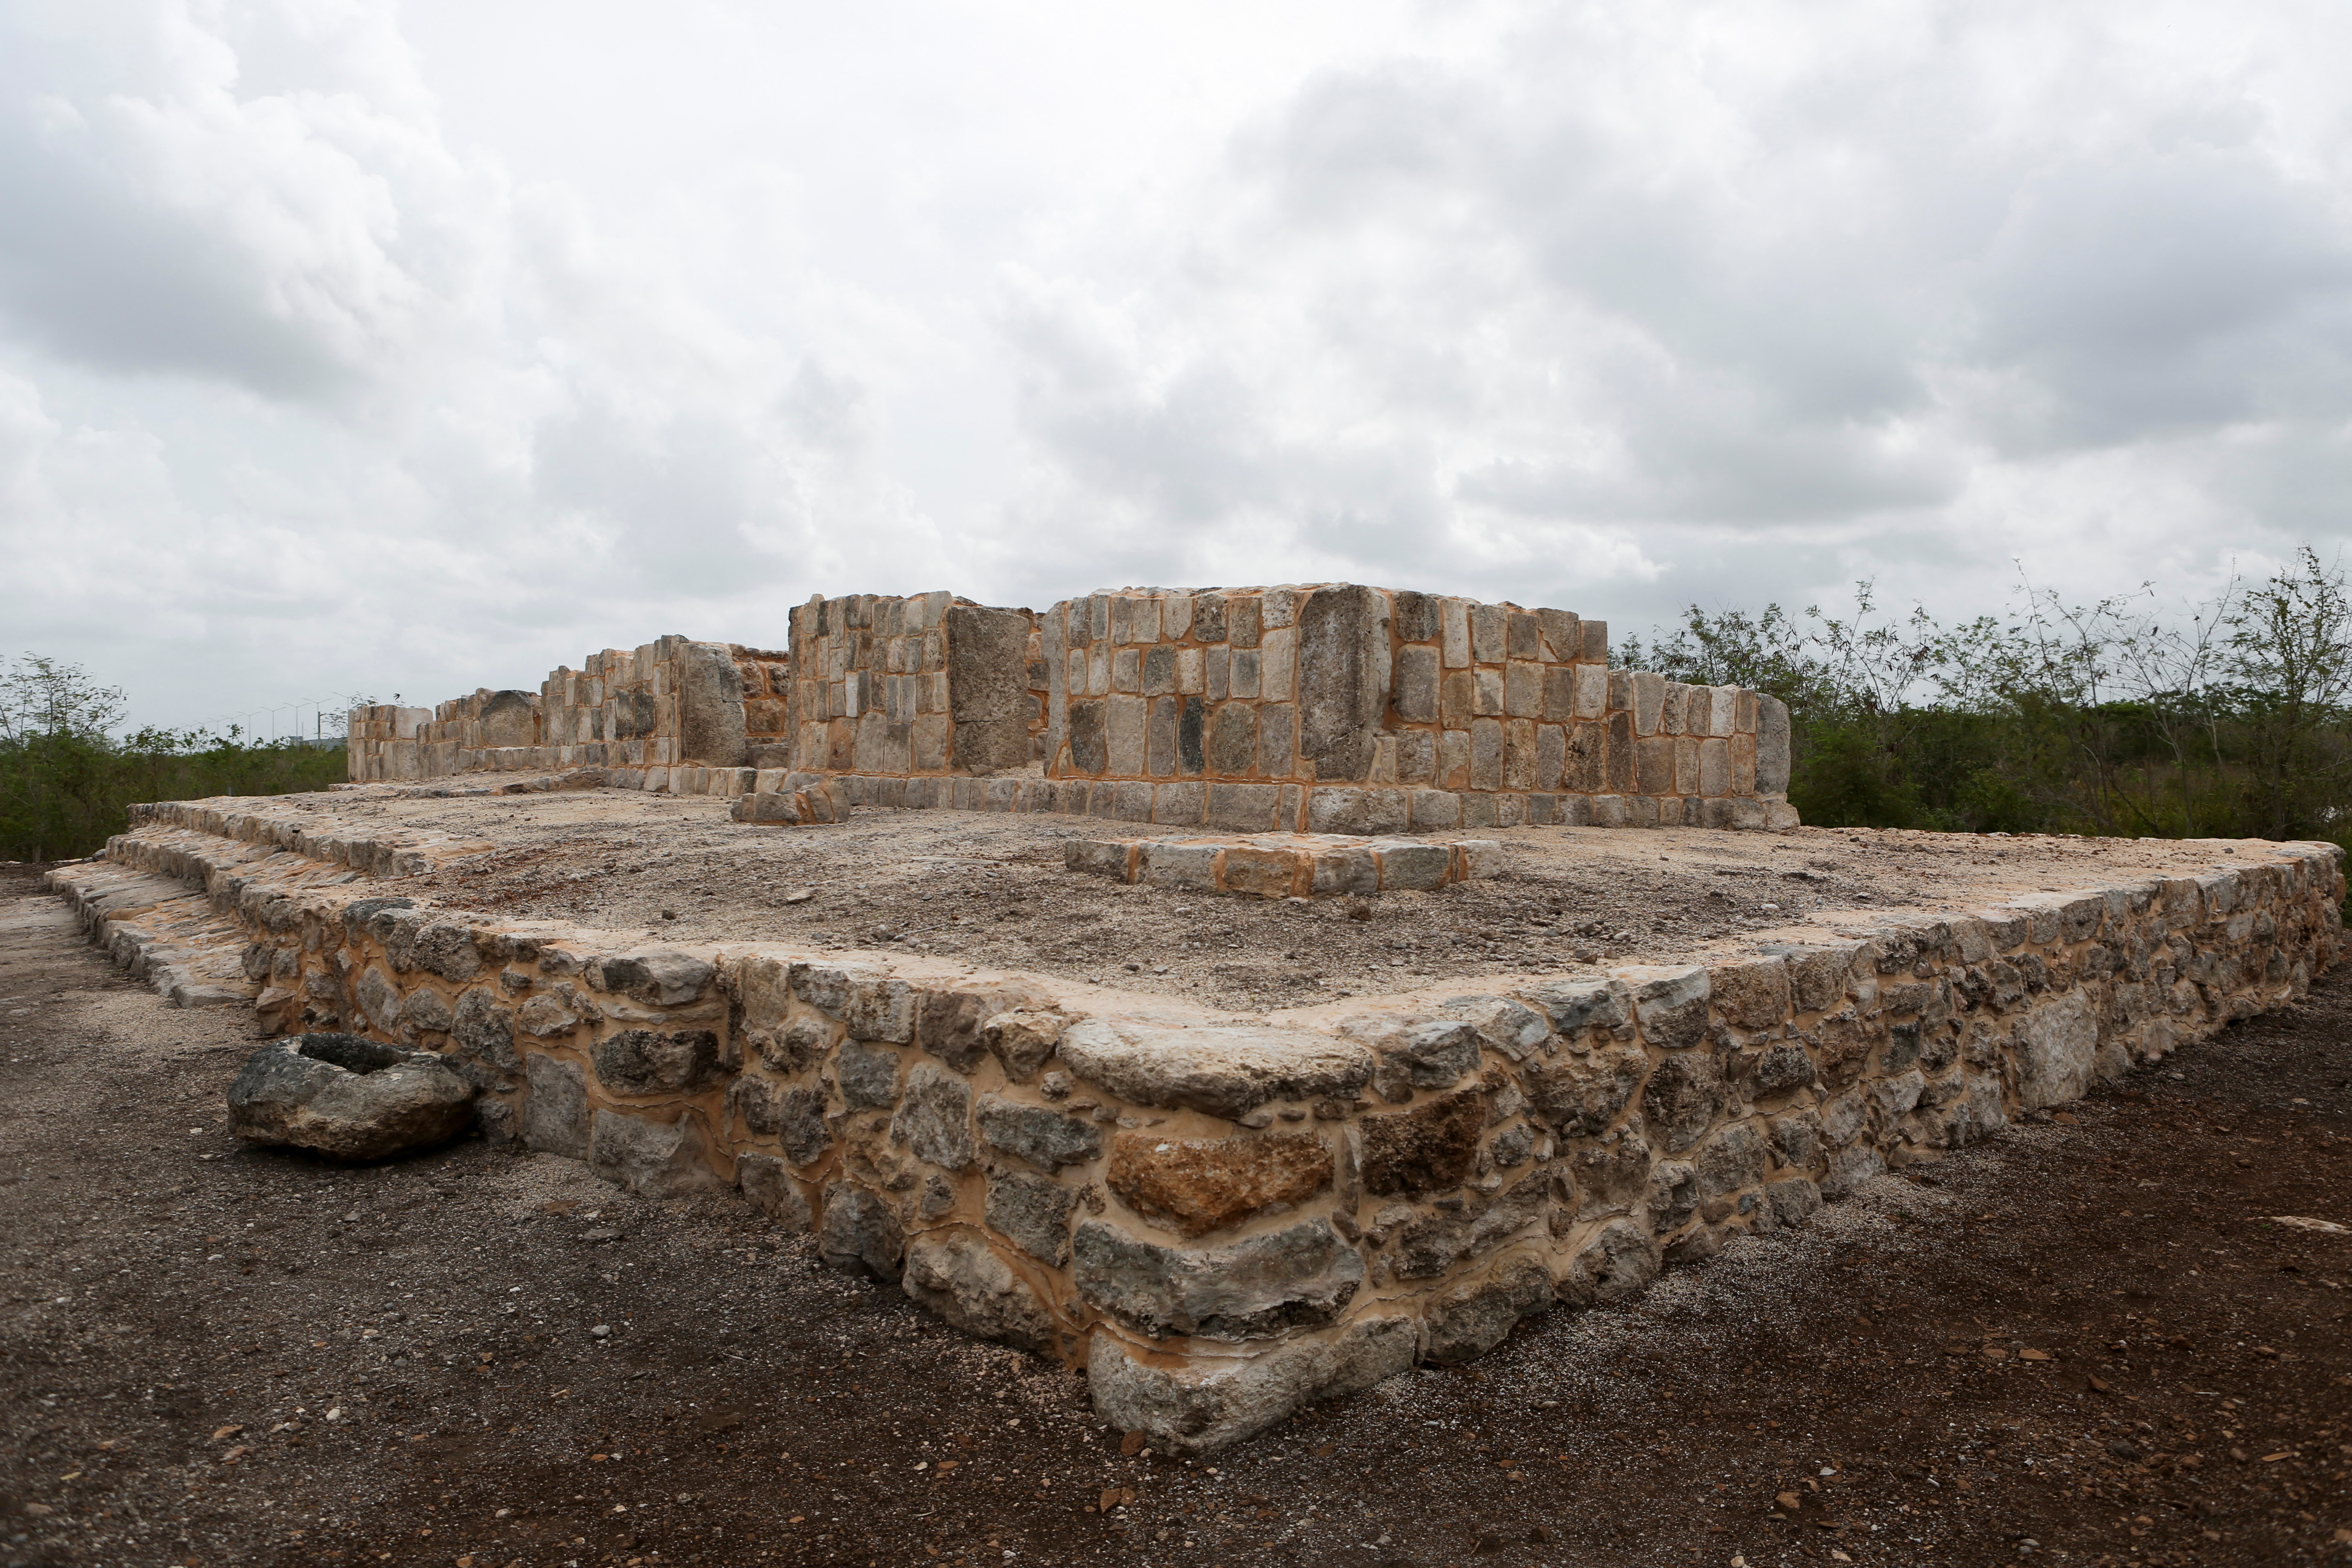 Archaeologists discover ruins of Mayan city in Southern Mexico